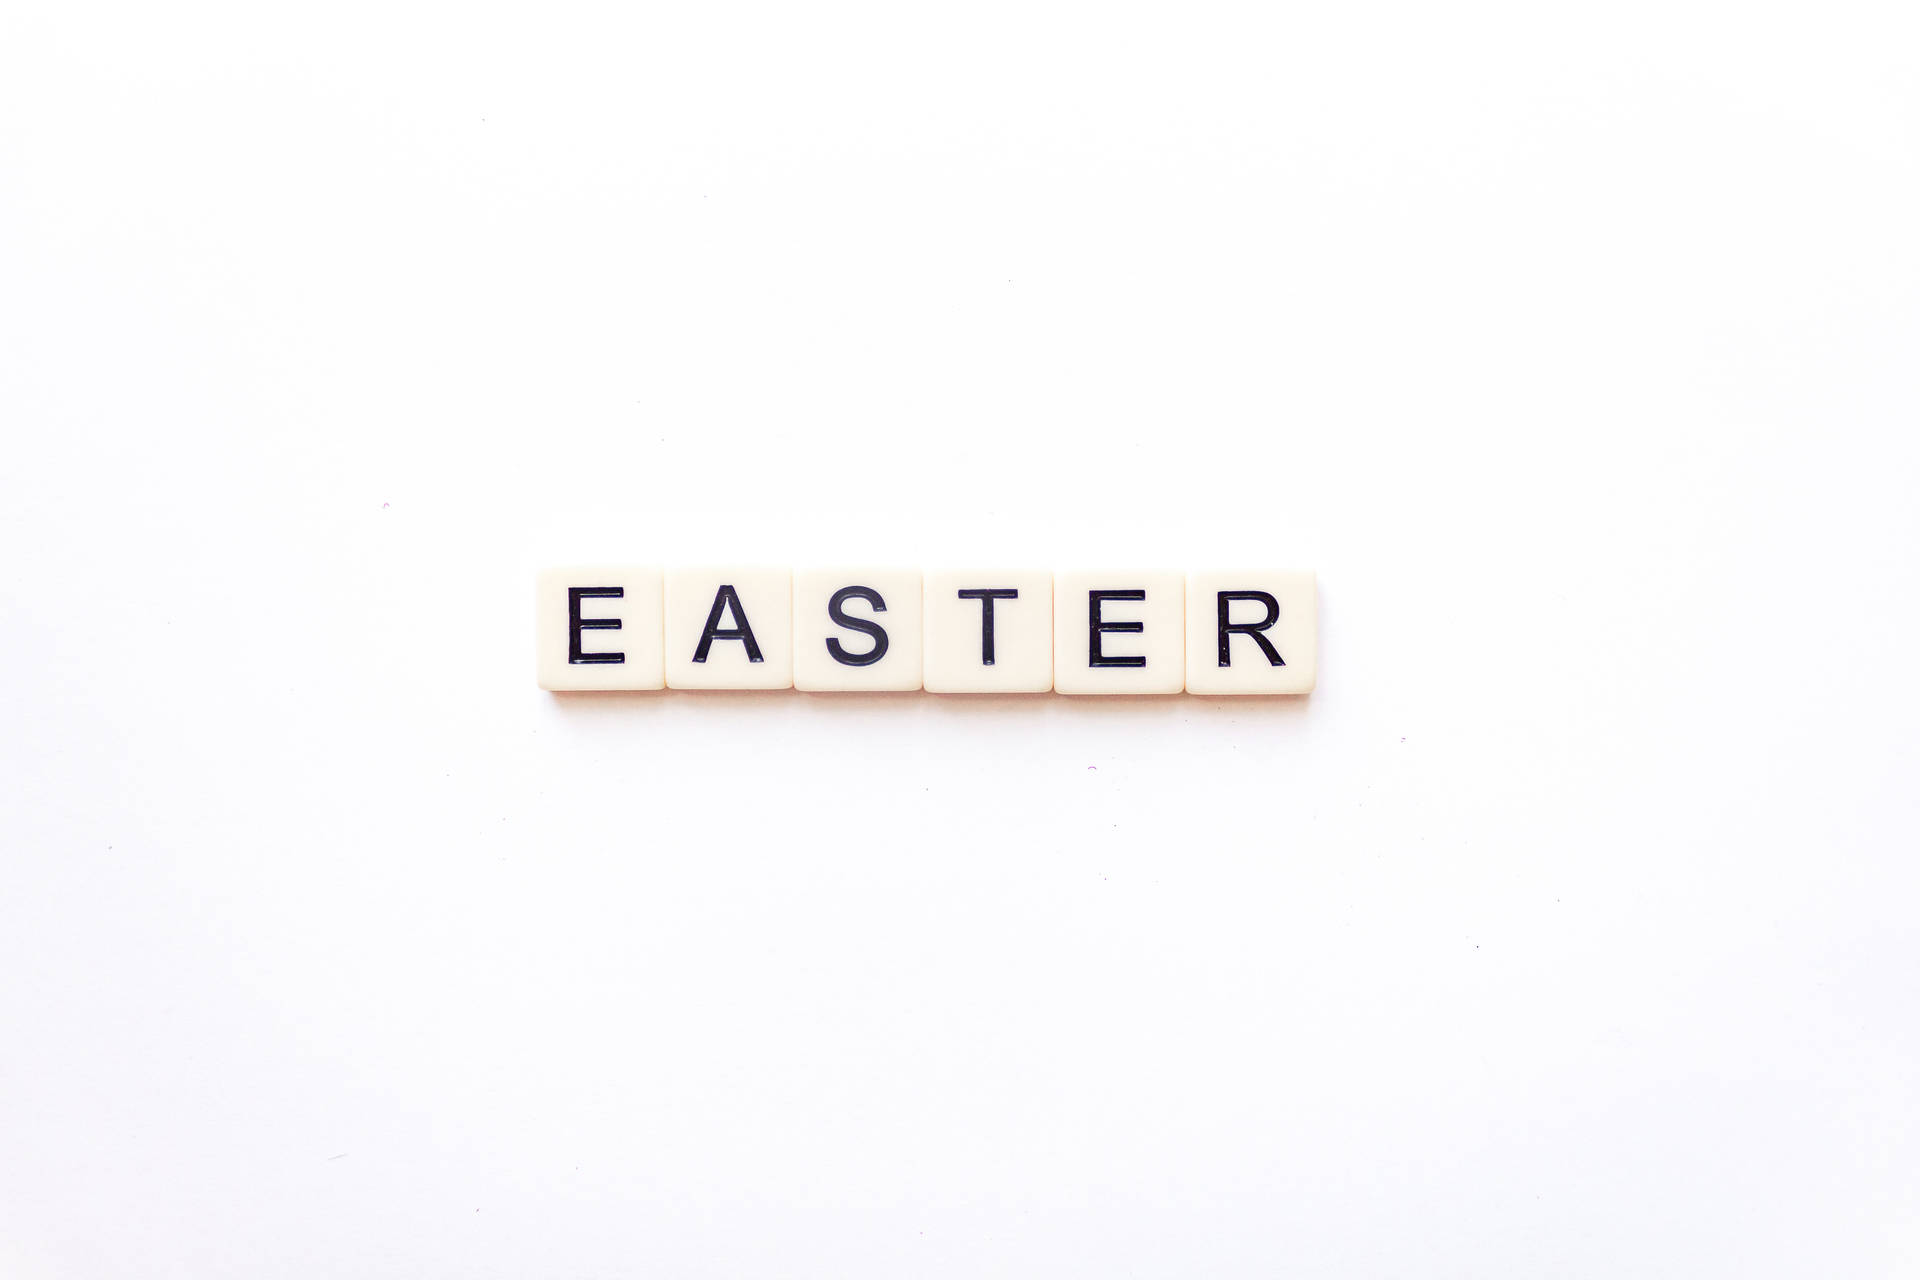 Spell out your Easter wishes with this Easter-themed Scrabble board! Wallpaper